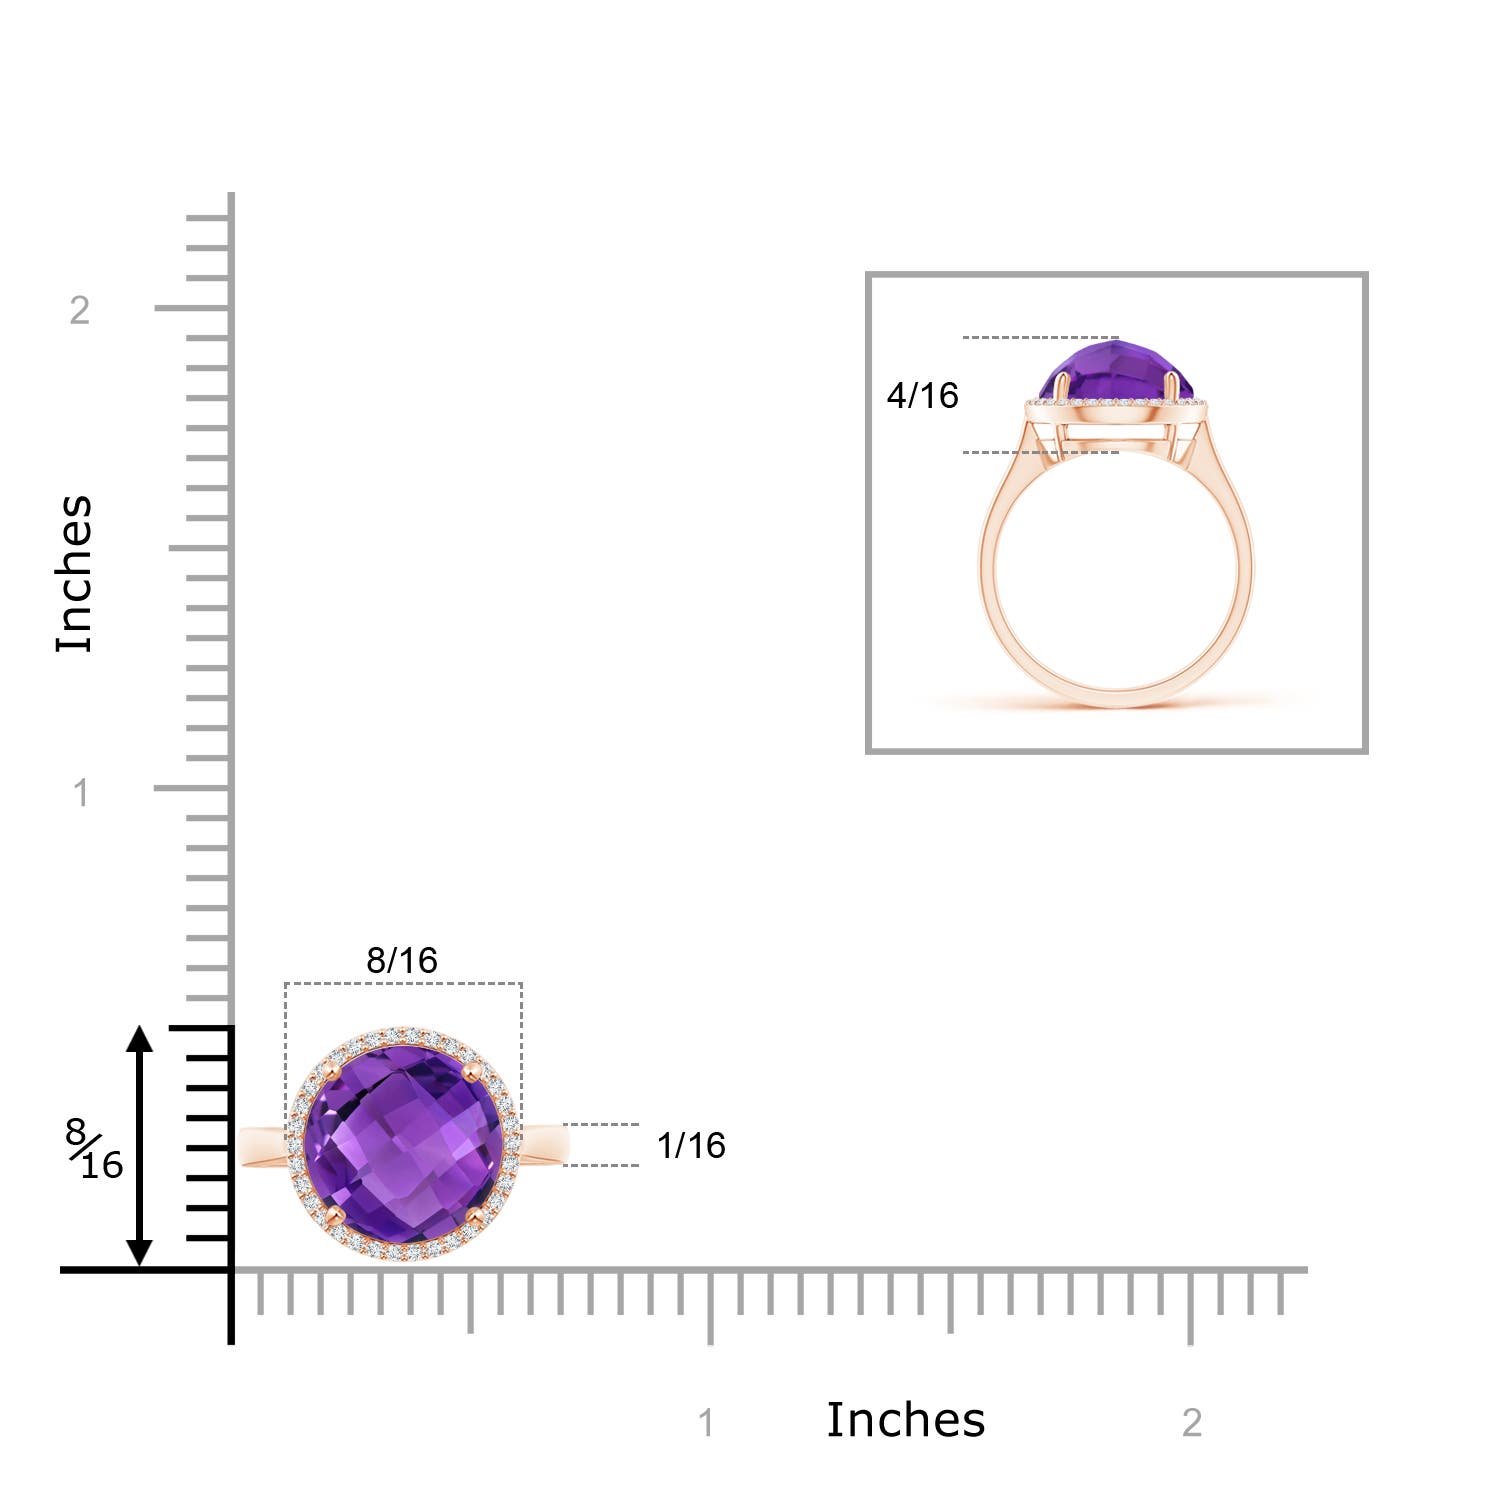 AAA - Amethyst / 3.77 CT / 14 KT Rose Gold